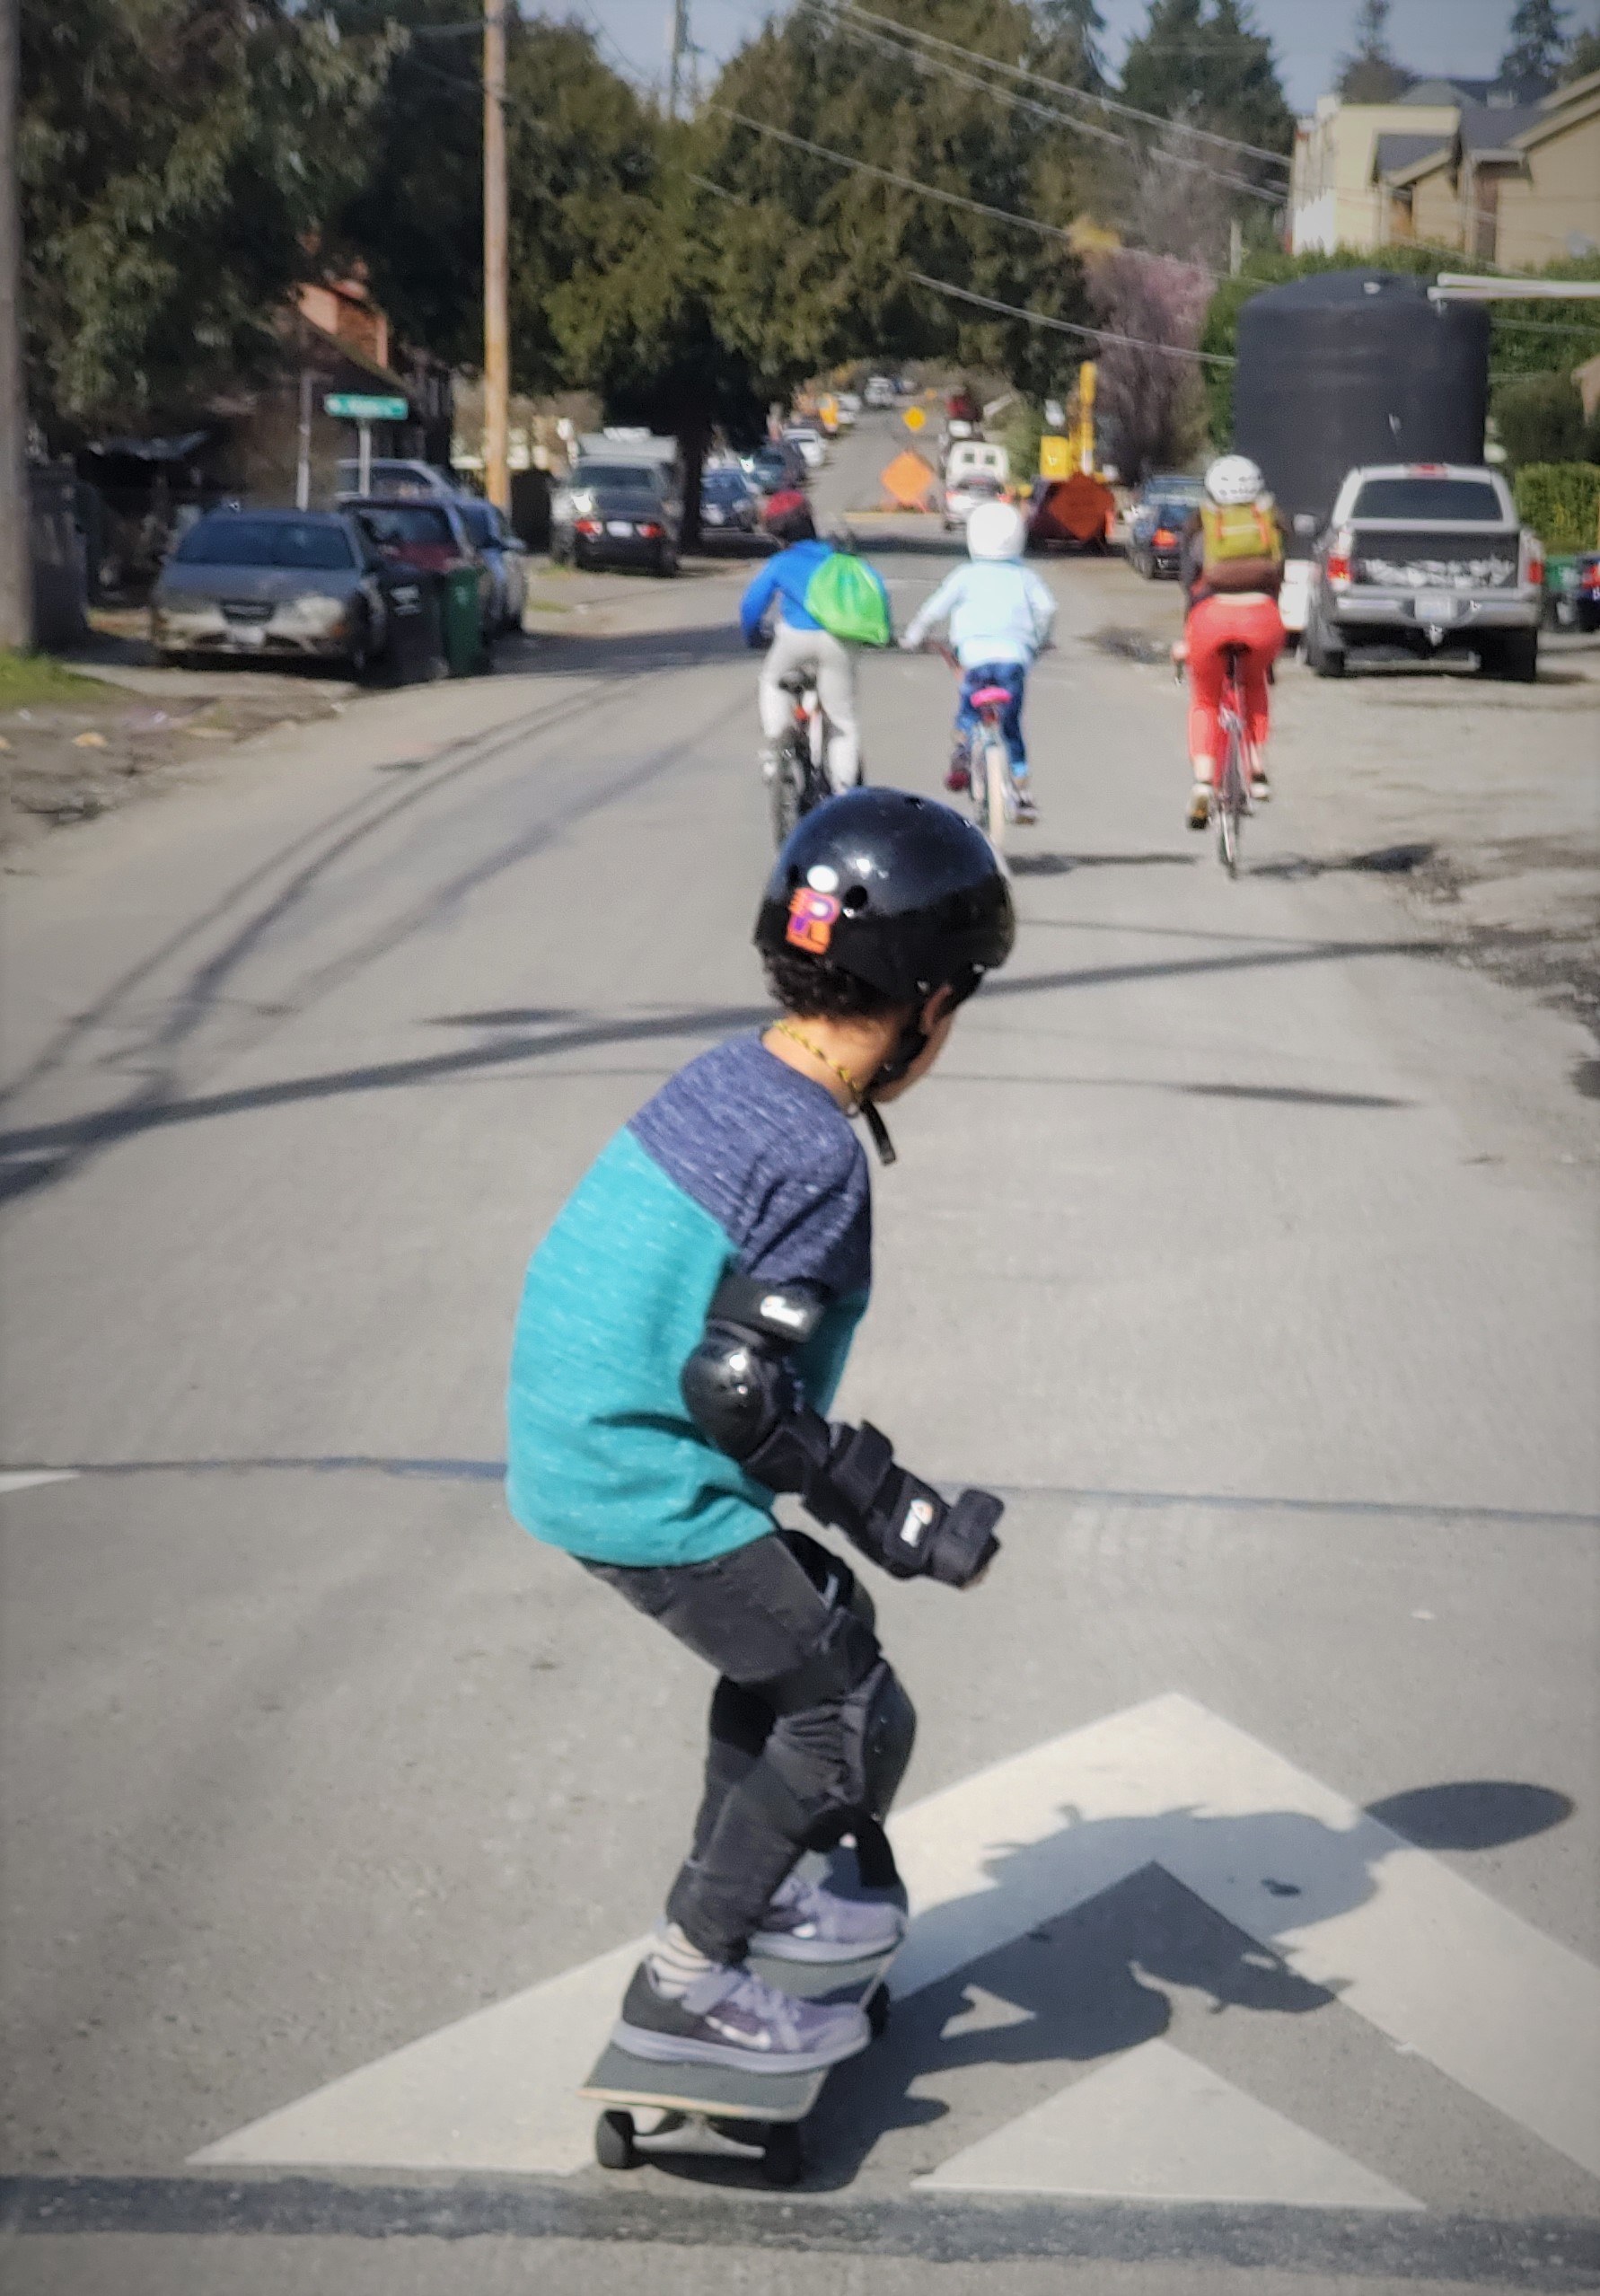 A kid riding their skateboard over a speed hump